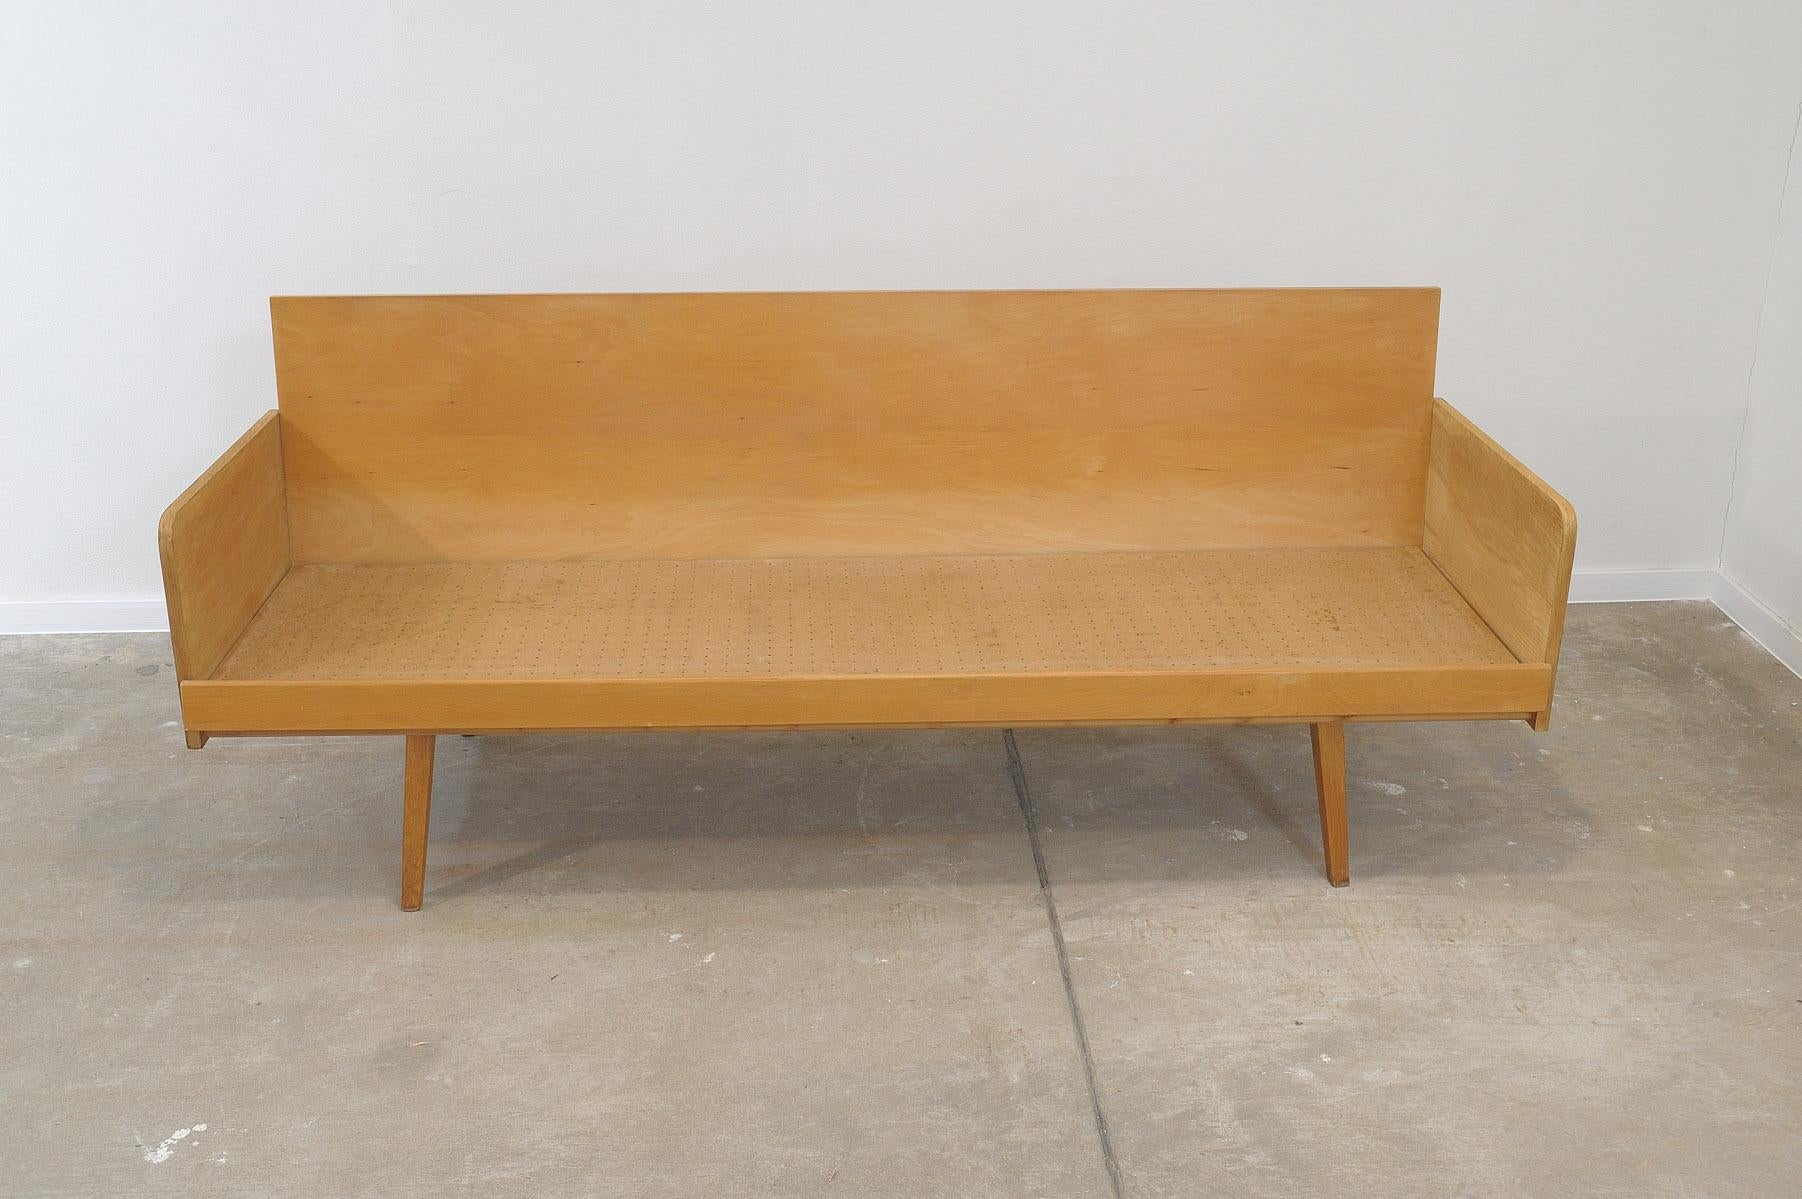 Mid century sofabed from Interiér Praha. It was made in the former Czechoslovakia in the 1960´s. This sofa has a wooden structure that is veneered in beech wood. The mattresses are rather soft but comfortable. The sofa is in very good Vintage